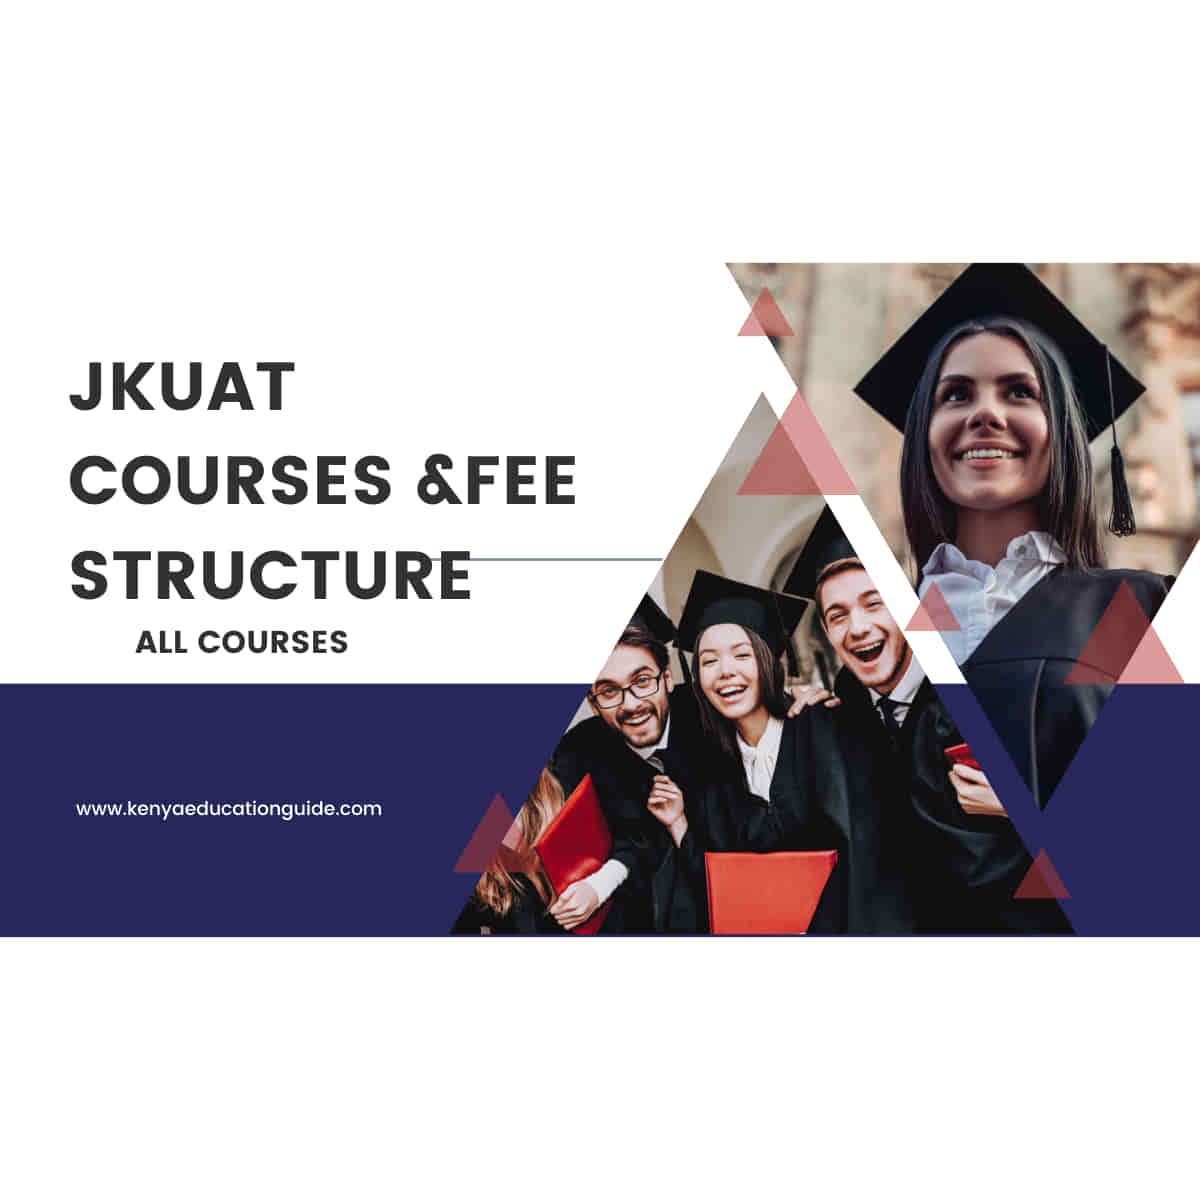 JKUAT courses and fee structure